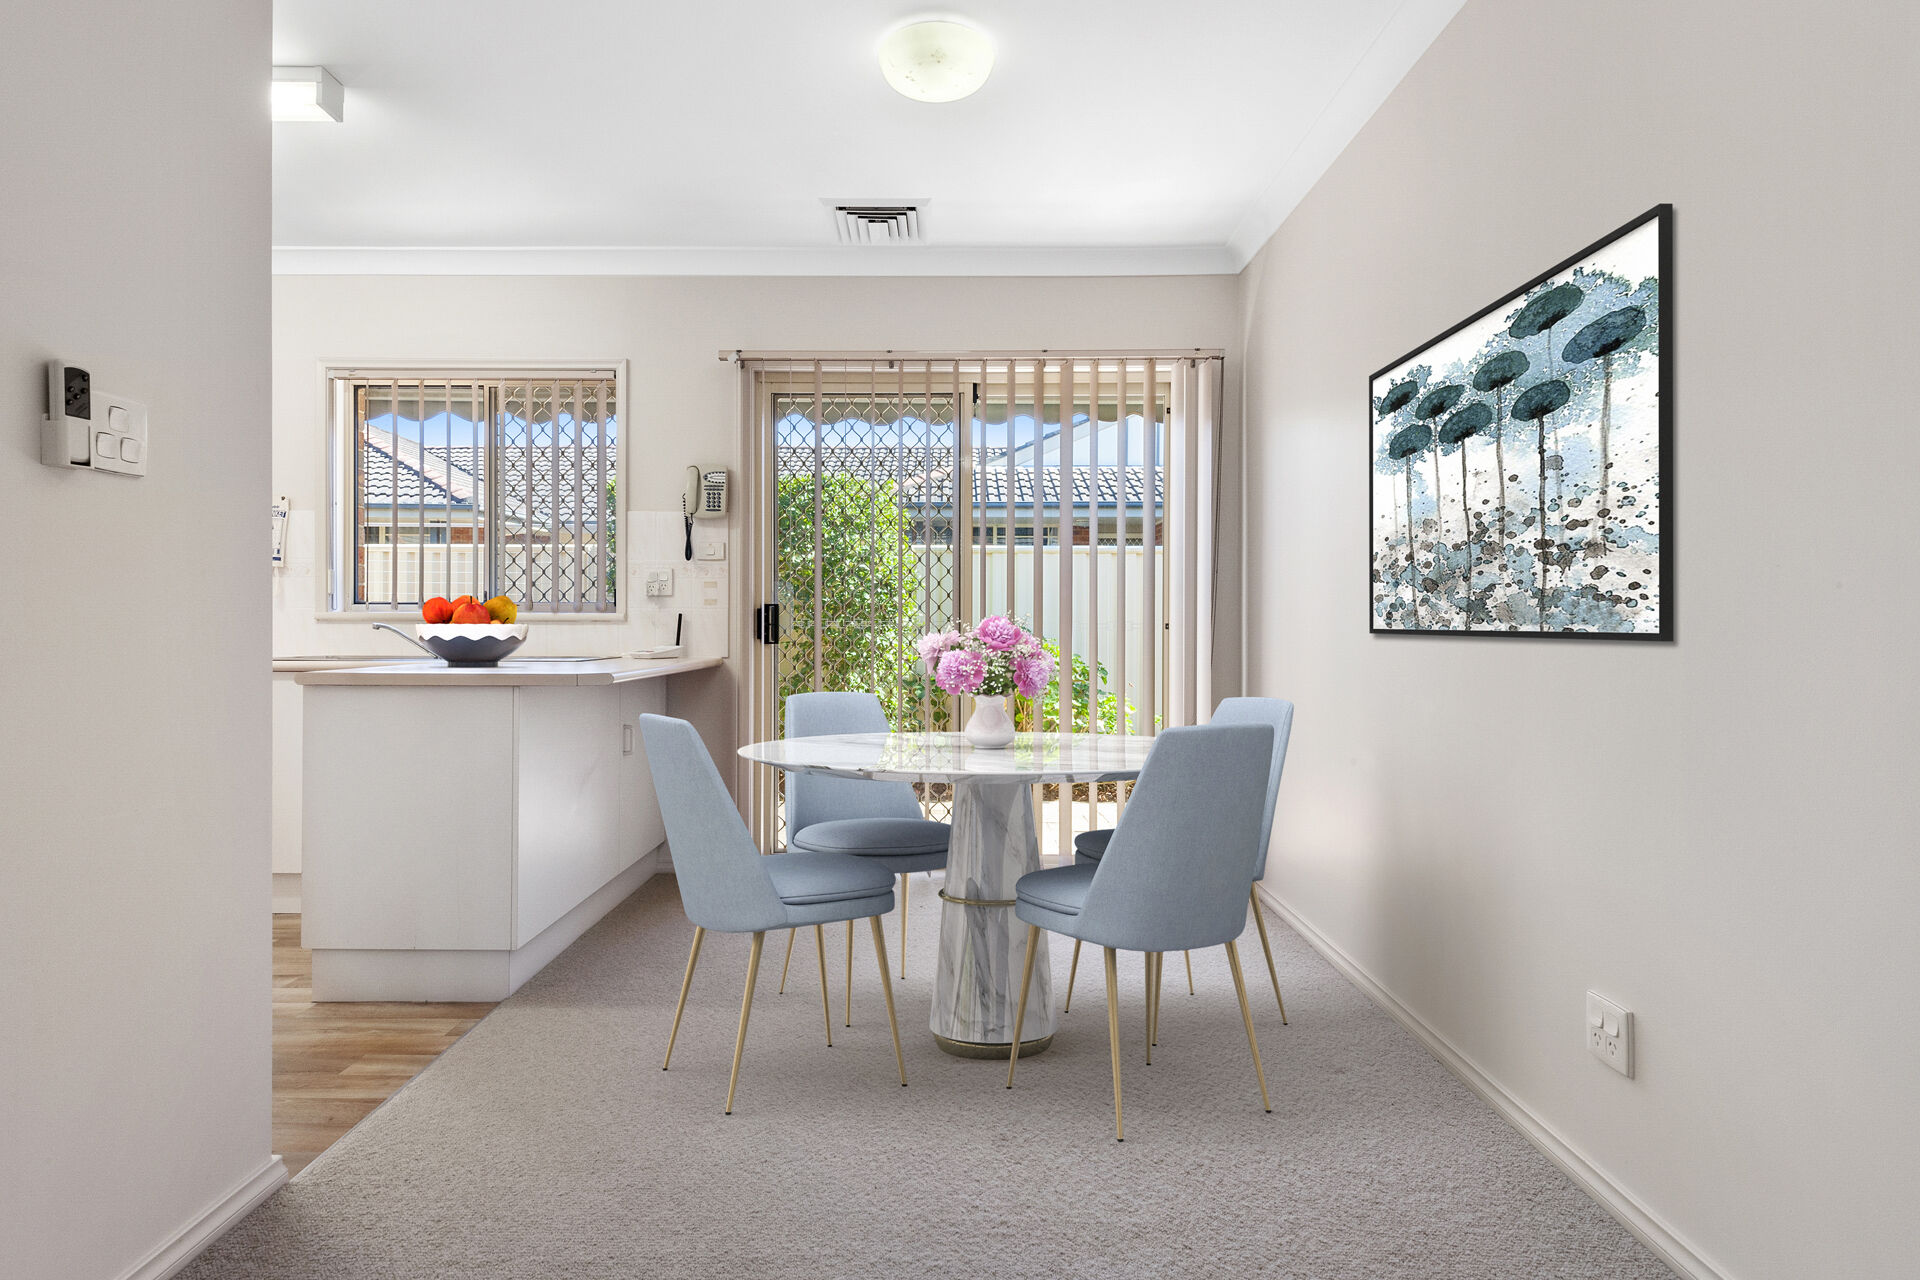 modern furnished dining room in a 2 bedroom home at the over 55s baptistcare All Saints retirement village in New Lambton Newcastle